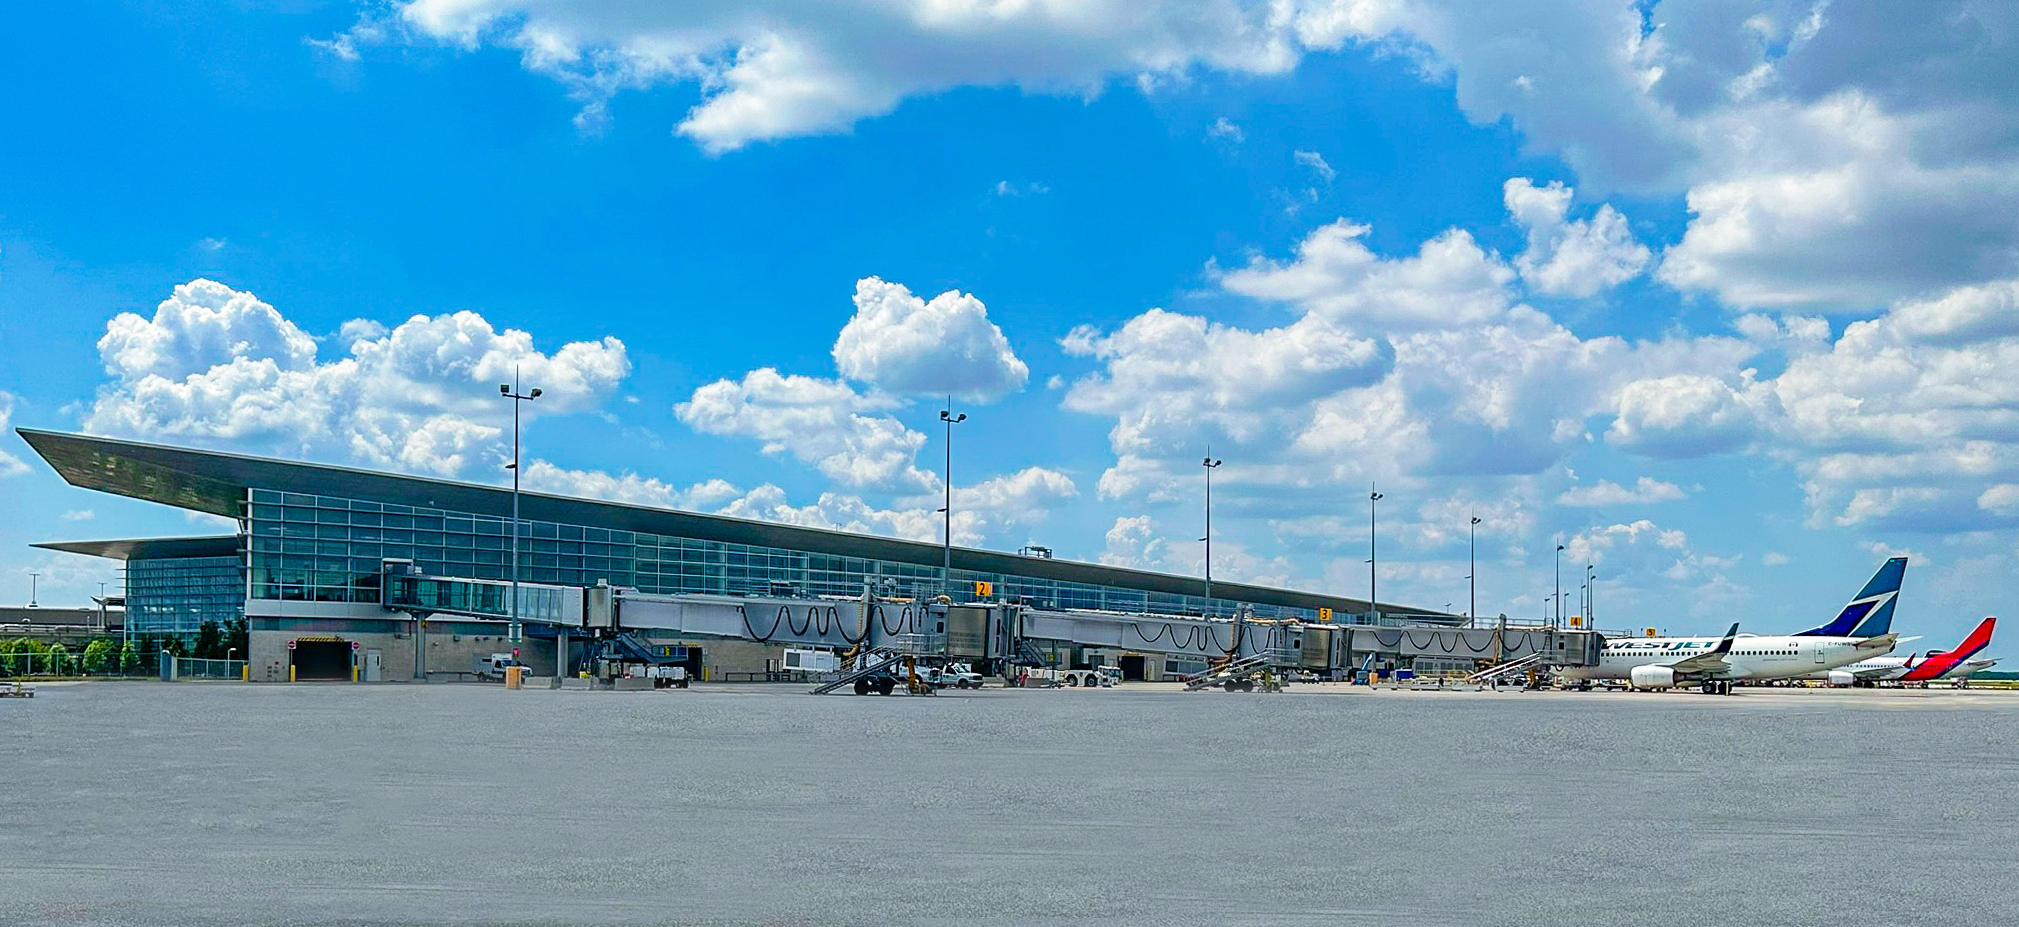 Under a blue sky with some clouds, two planes are parked at the boarding bridges of the Winnipeg Richardson International Airport terminal with the main apron shown in the foreground.